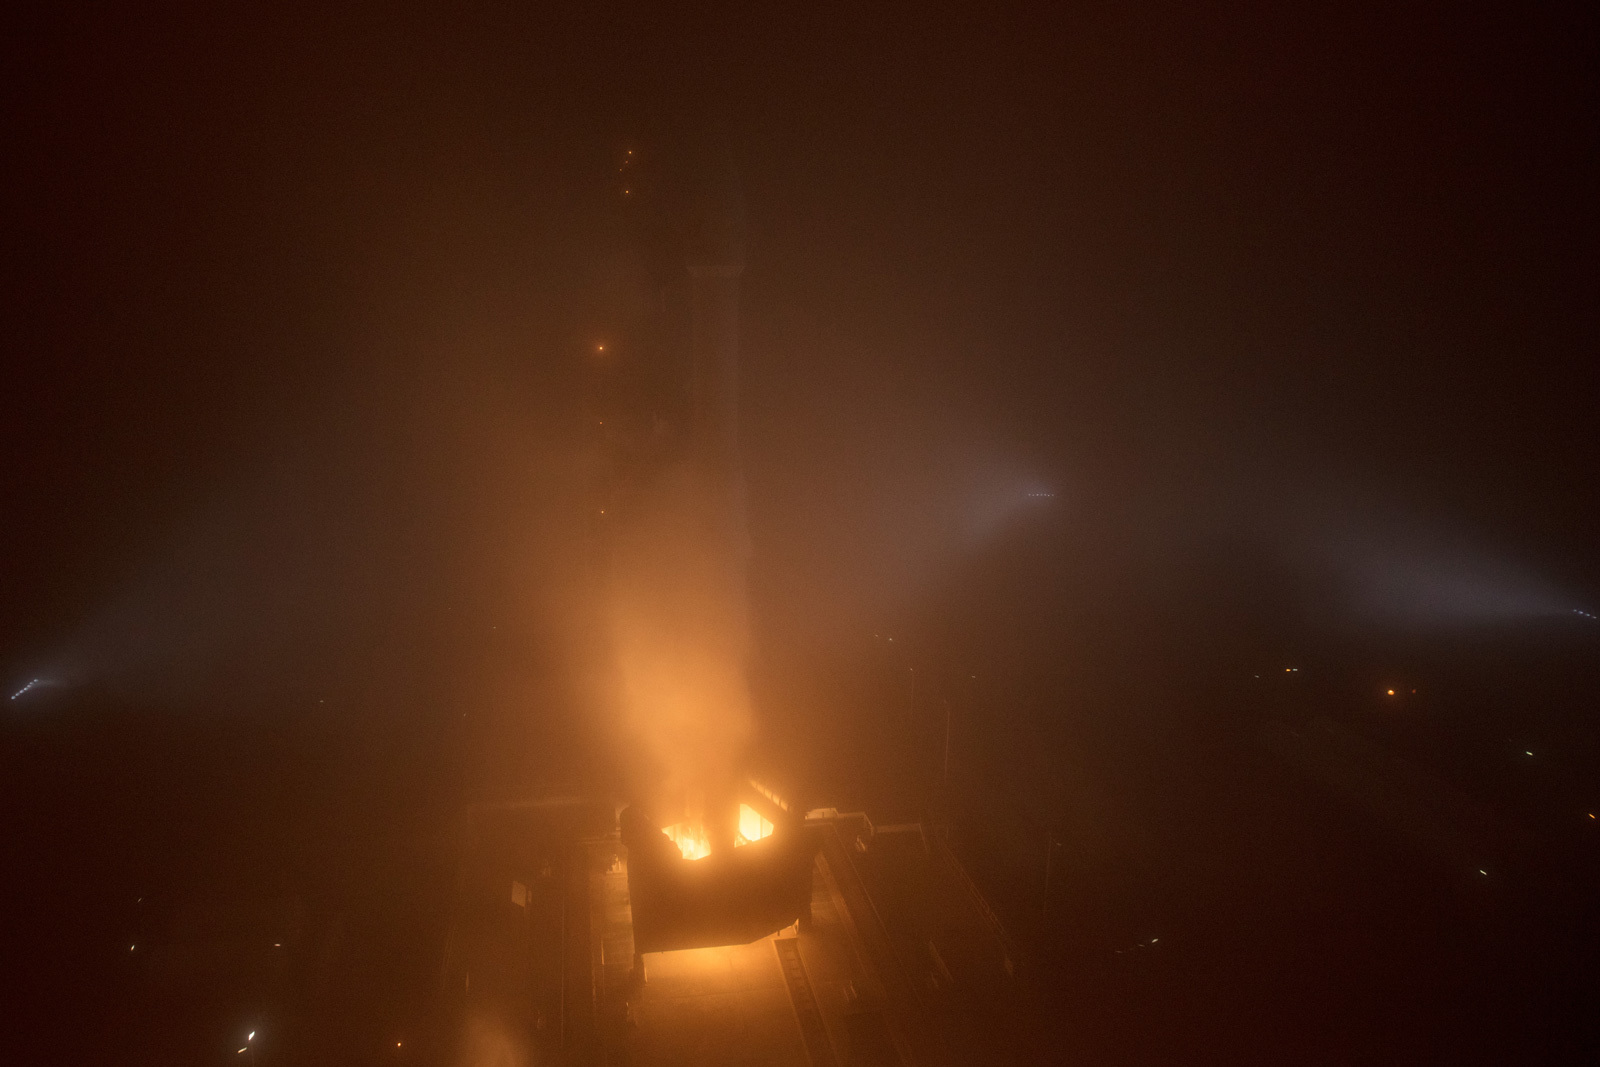 The NASA InSight spacecraft launches onboard a United Launch Alliance Atlas-V rocket, Saturday, May 5, 2018, from Vandenberg Air Force Base in California. InSight, short for Interior Exploration using Seismic Investigations, Geodesy and Heat Transport, is a Mars lander designed to study the "inner space" of Mars: its crust, mantle, and core. Credit: NASA/Bill Ingall